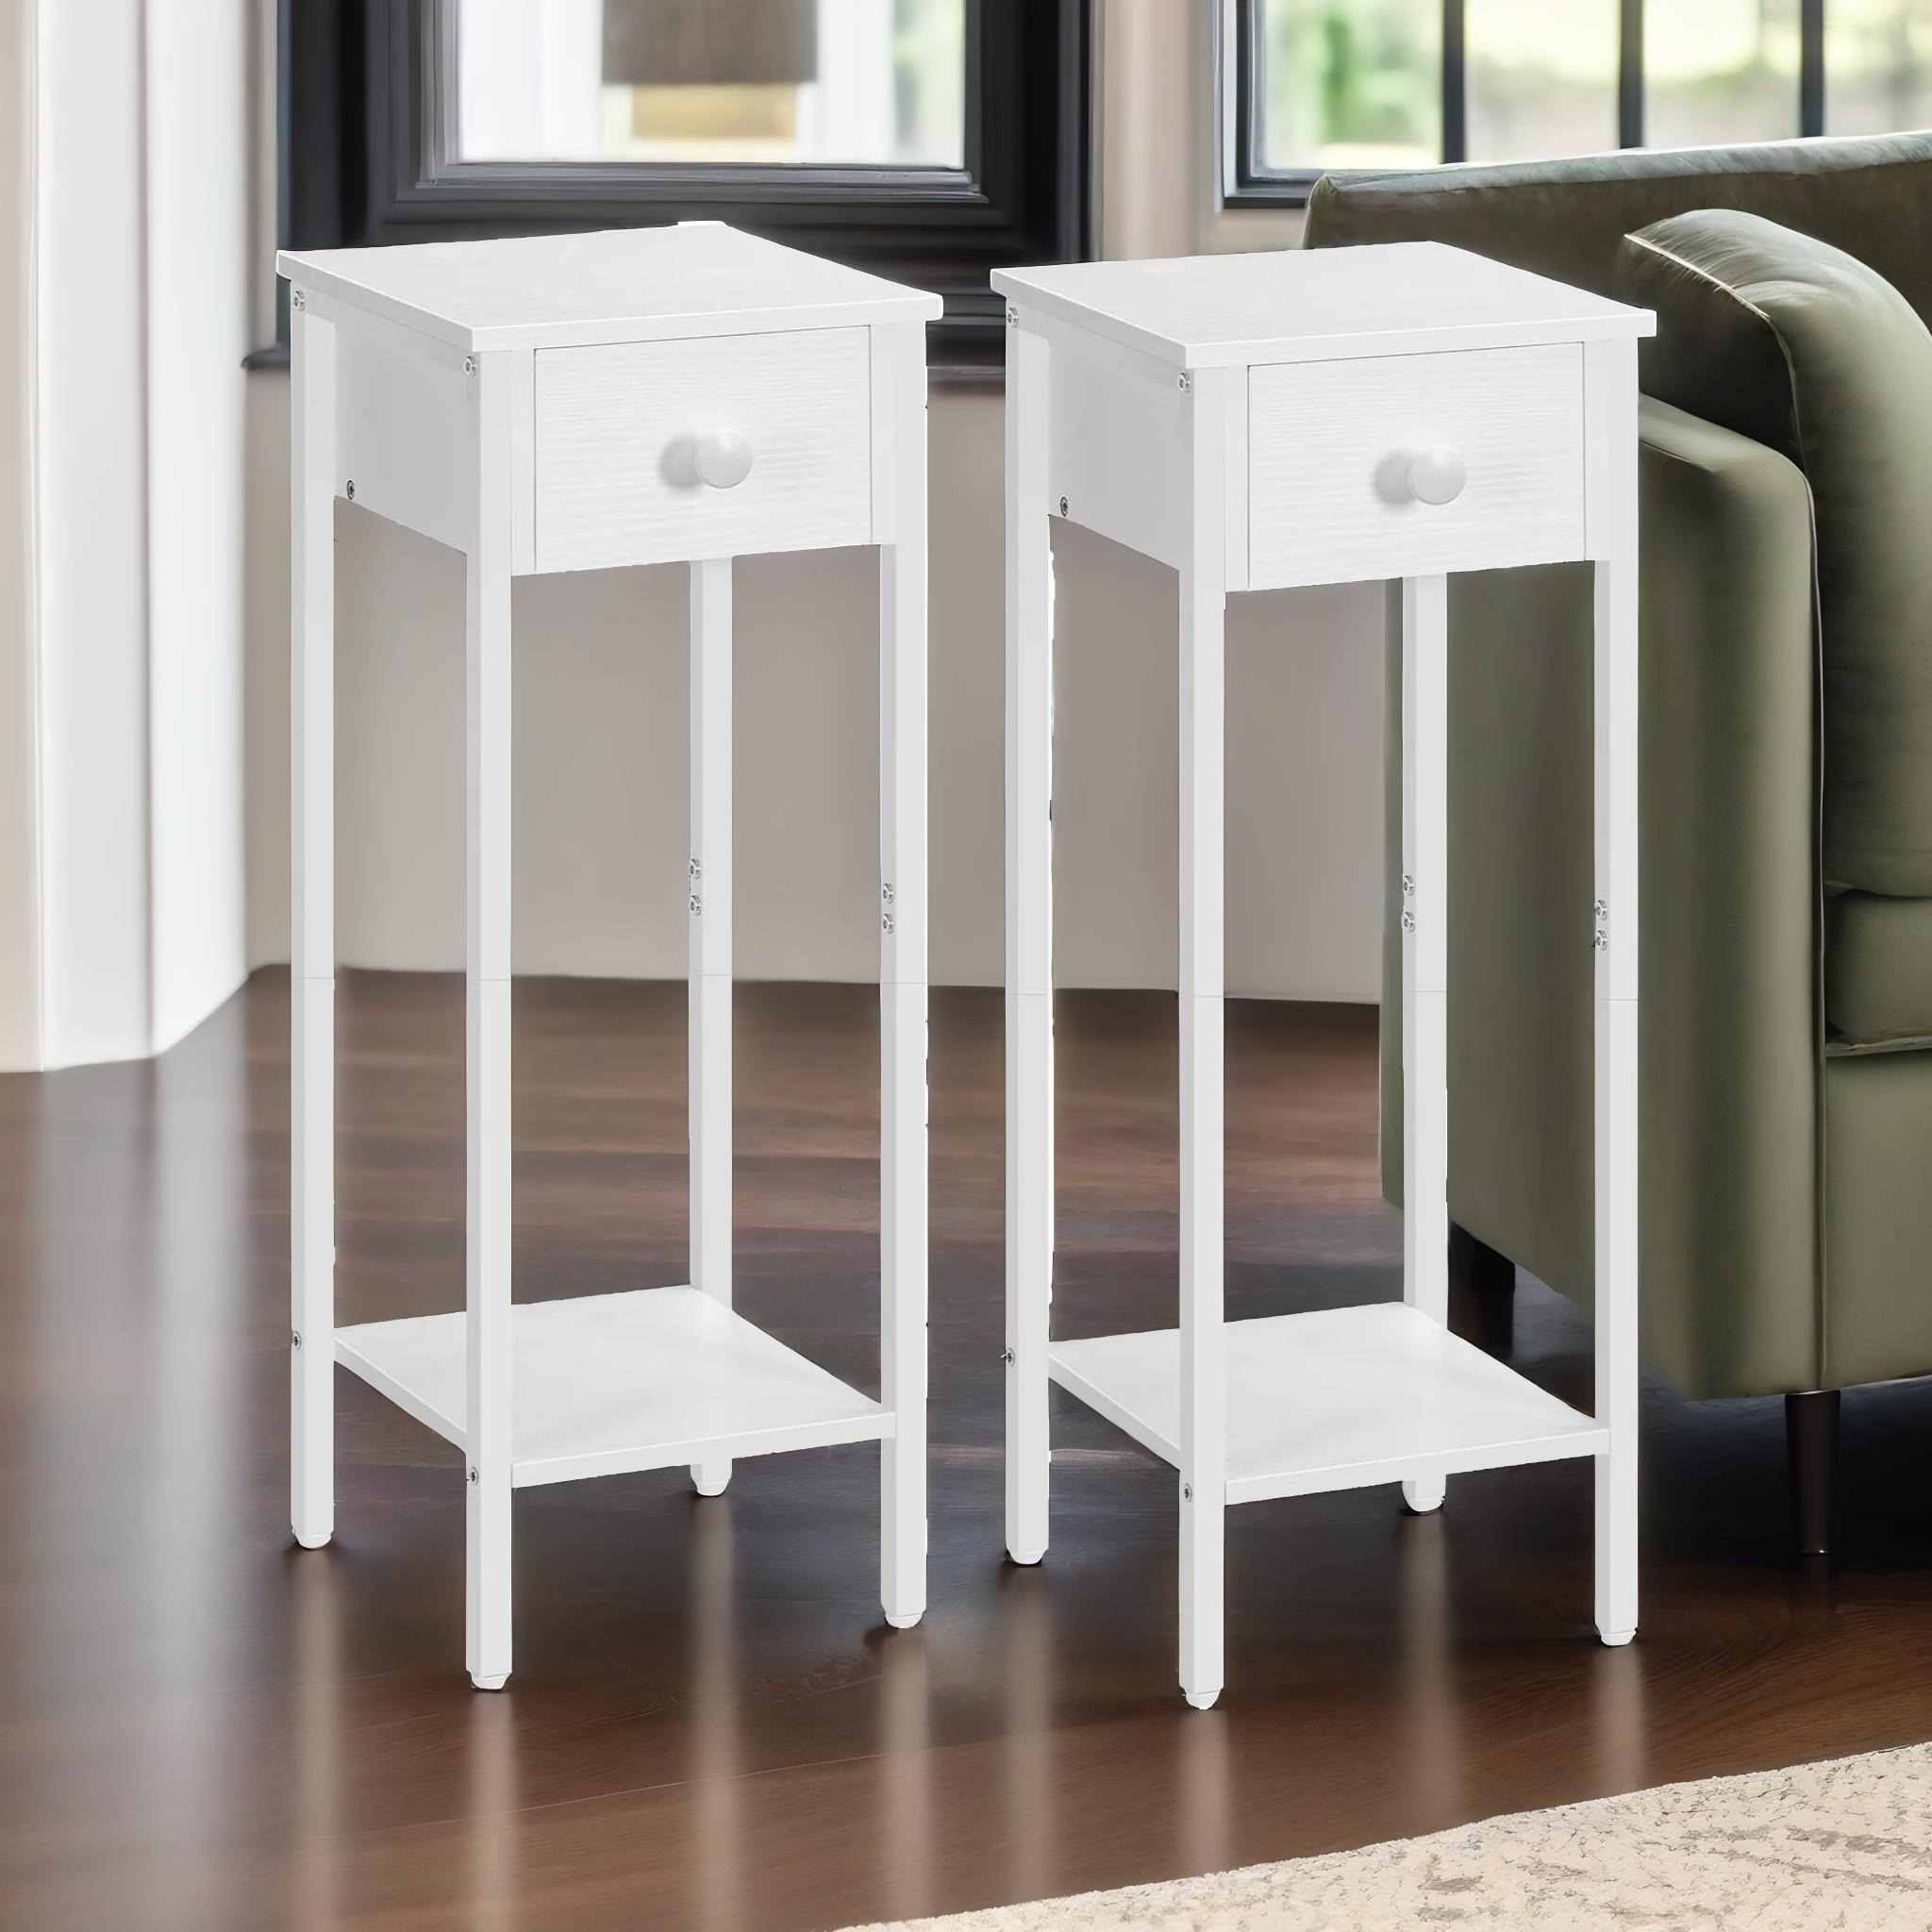 Set of 2 Tall Bedside Tables - image 1